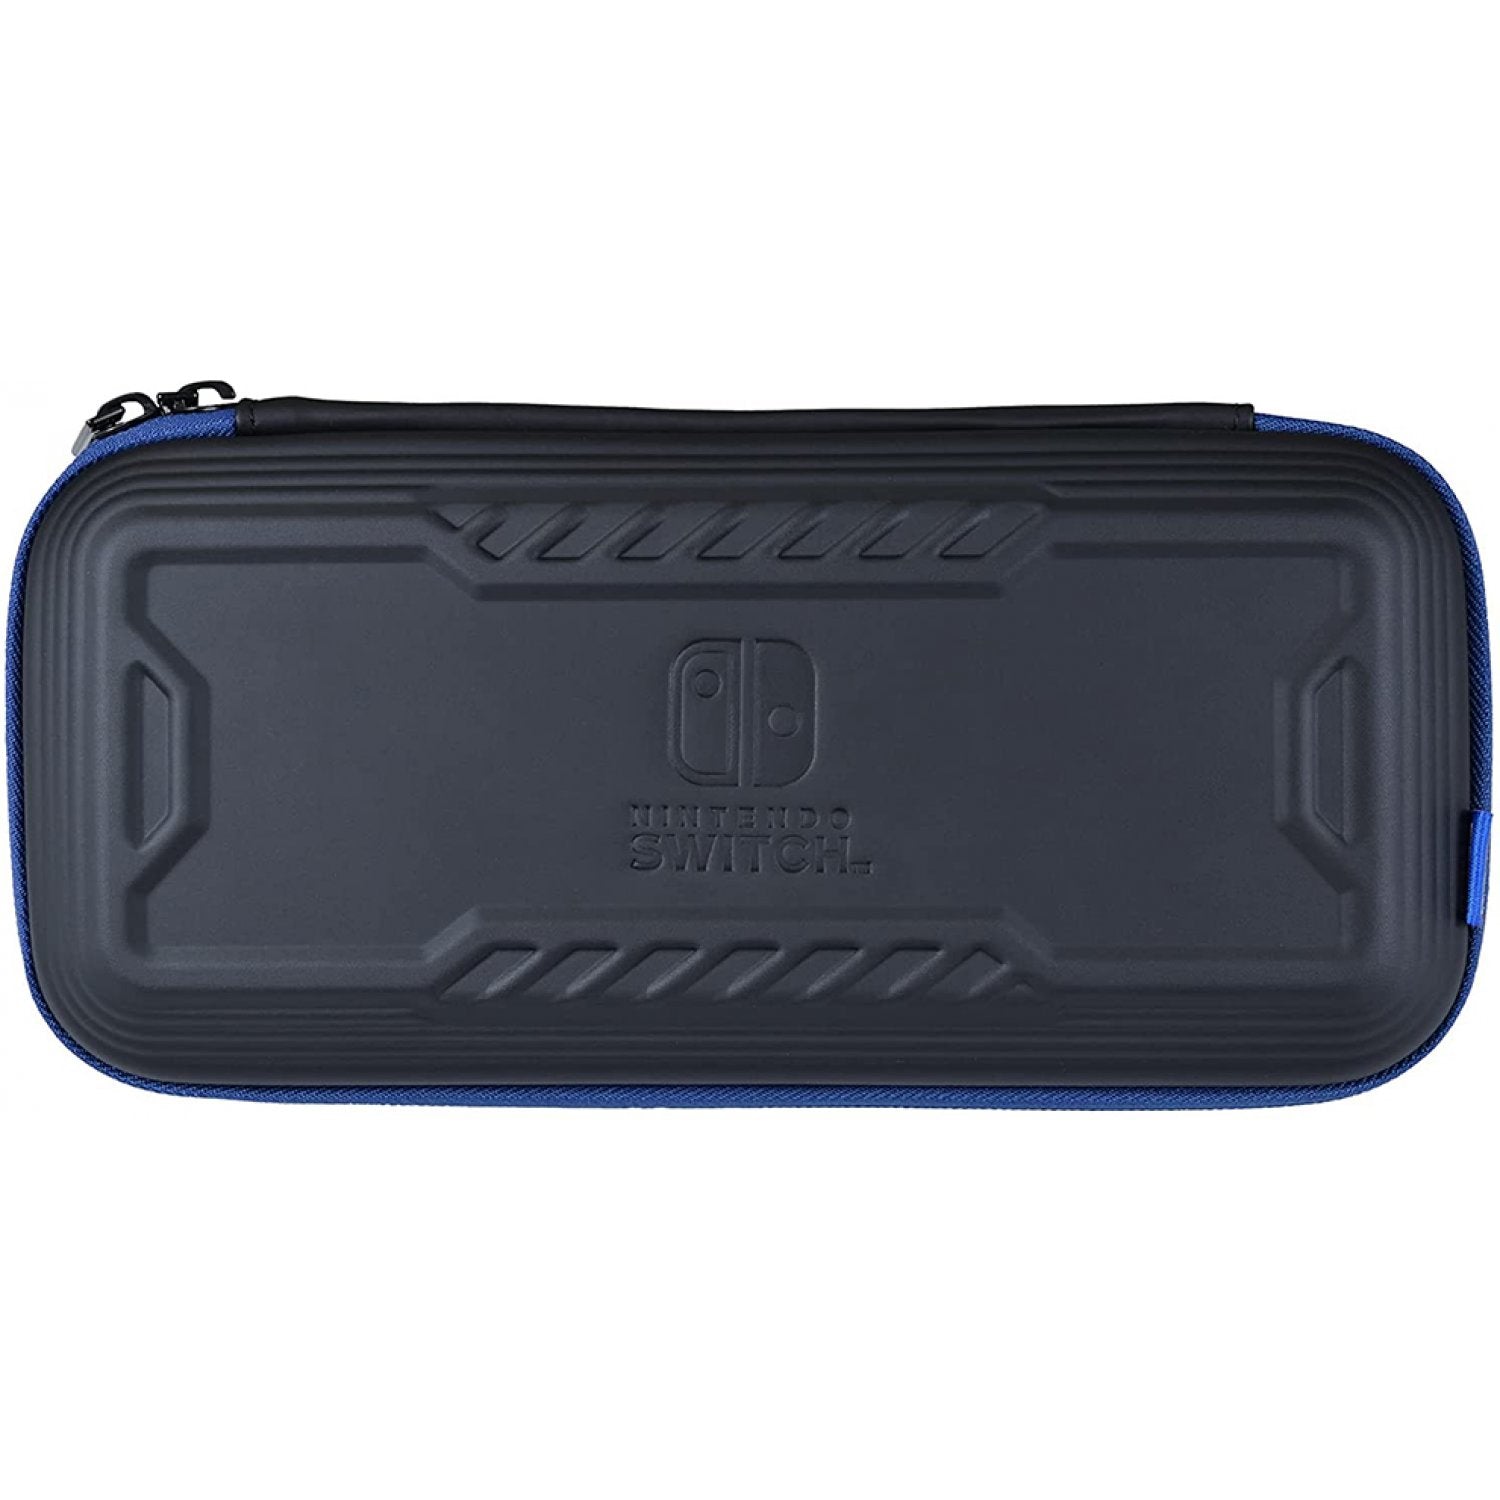 HORI NSW OLED Shock Absorption Tough Pouch Black/Blue (NSW-814)